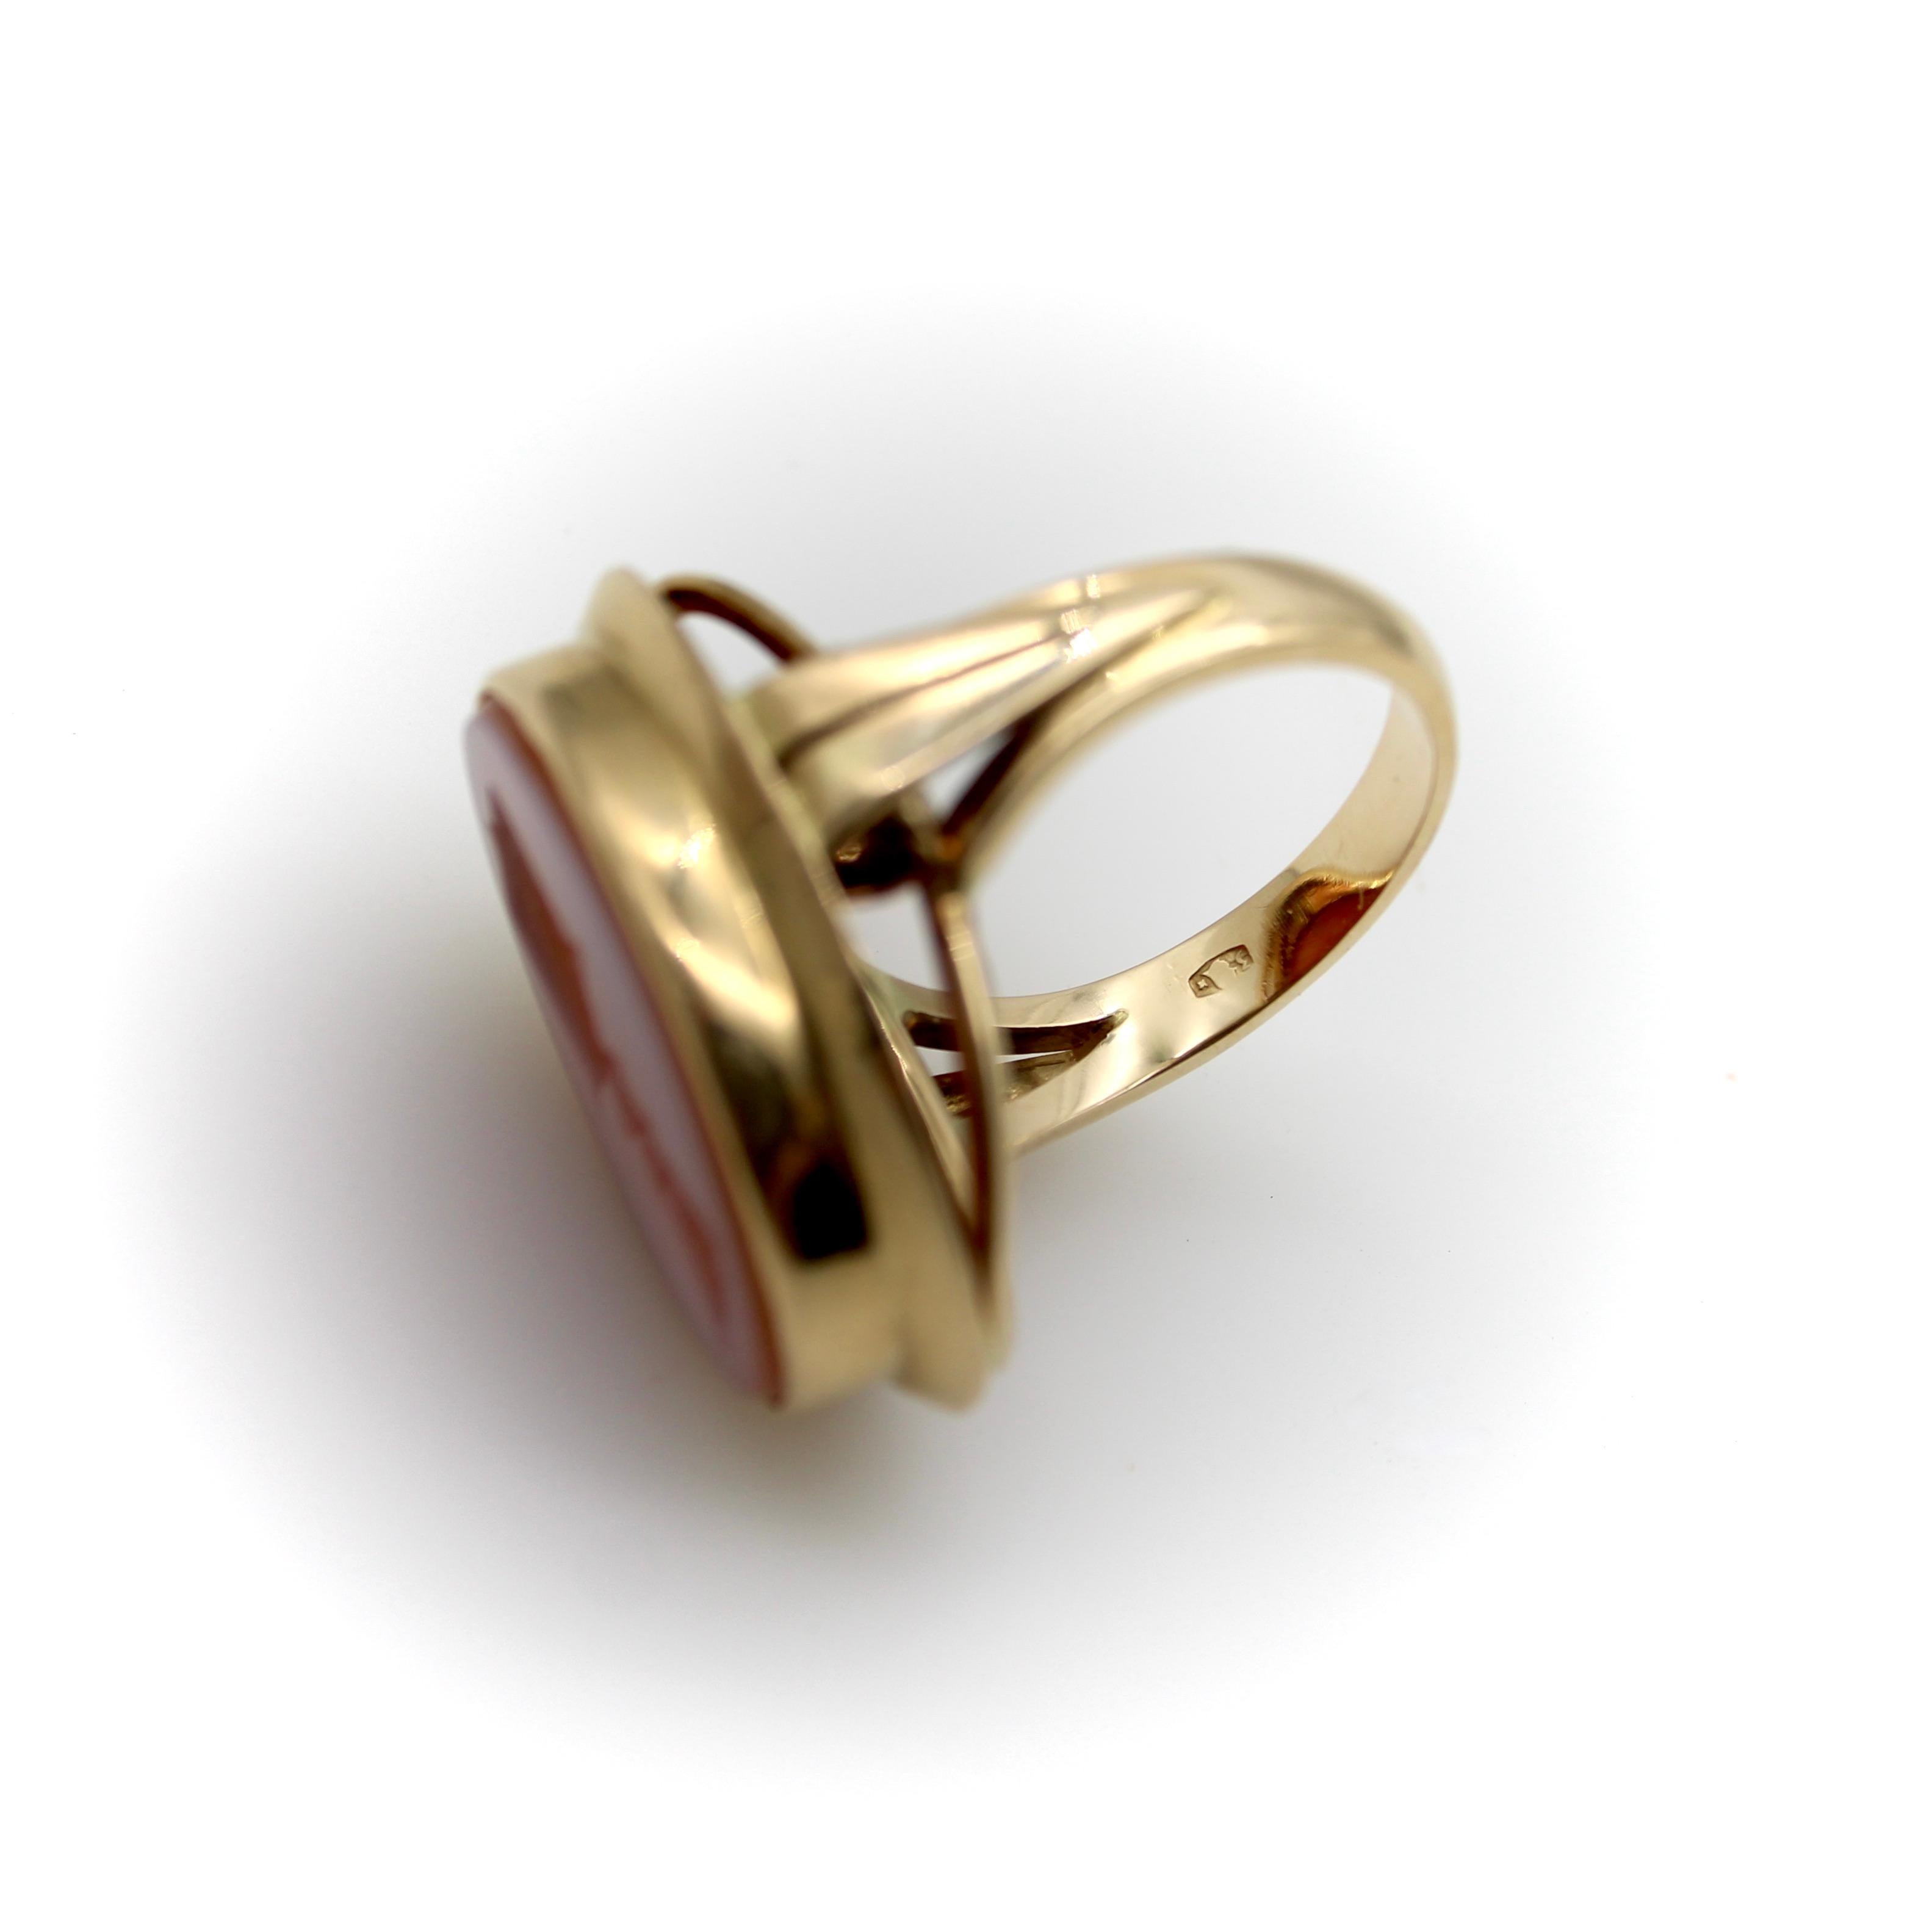 Set in 14k gold, the banded agate intaglio ring is hand-carved with a unique image: a shield topped by a knight’s helmet and a plume of feathers. The shield contains a six-pointed star and a half-moon, a wonderfully theatrical image. The banded